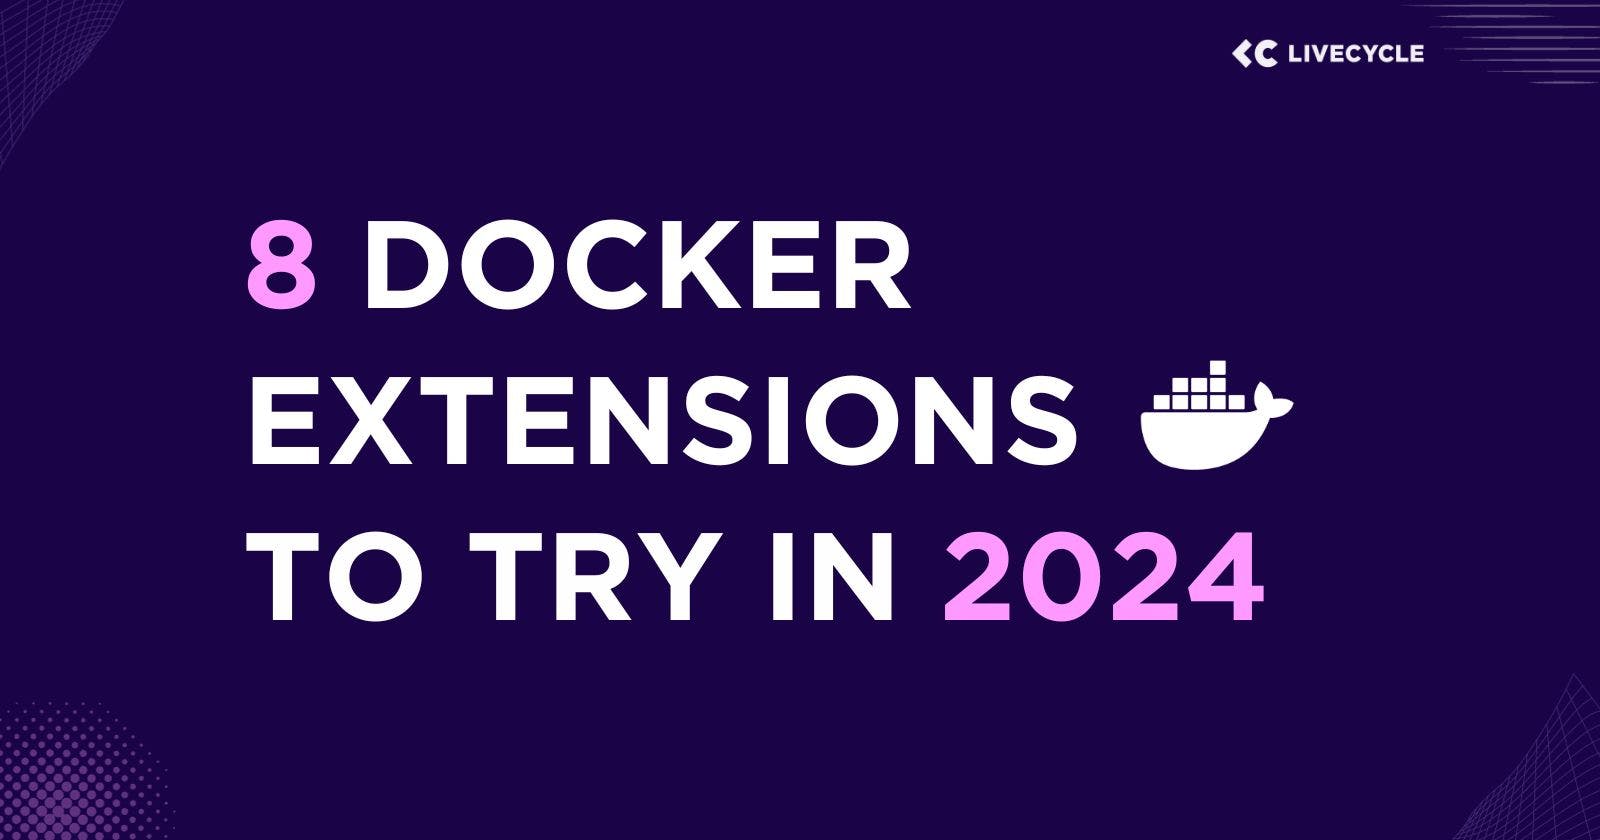 8 Docker Extensions to Try in 2024